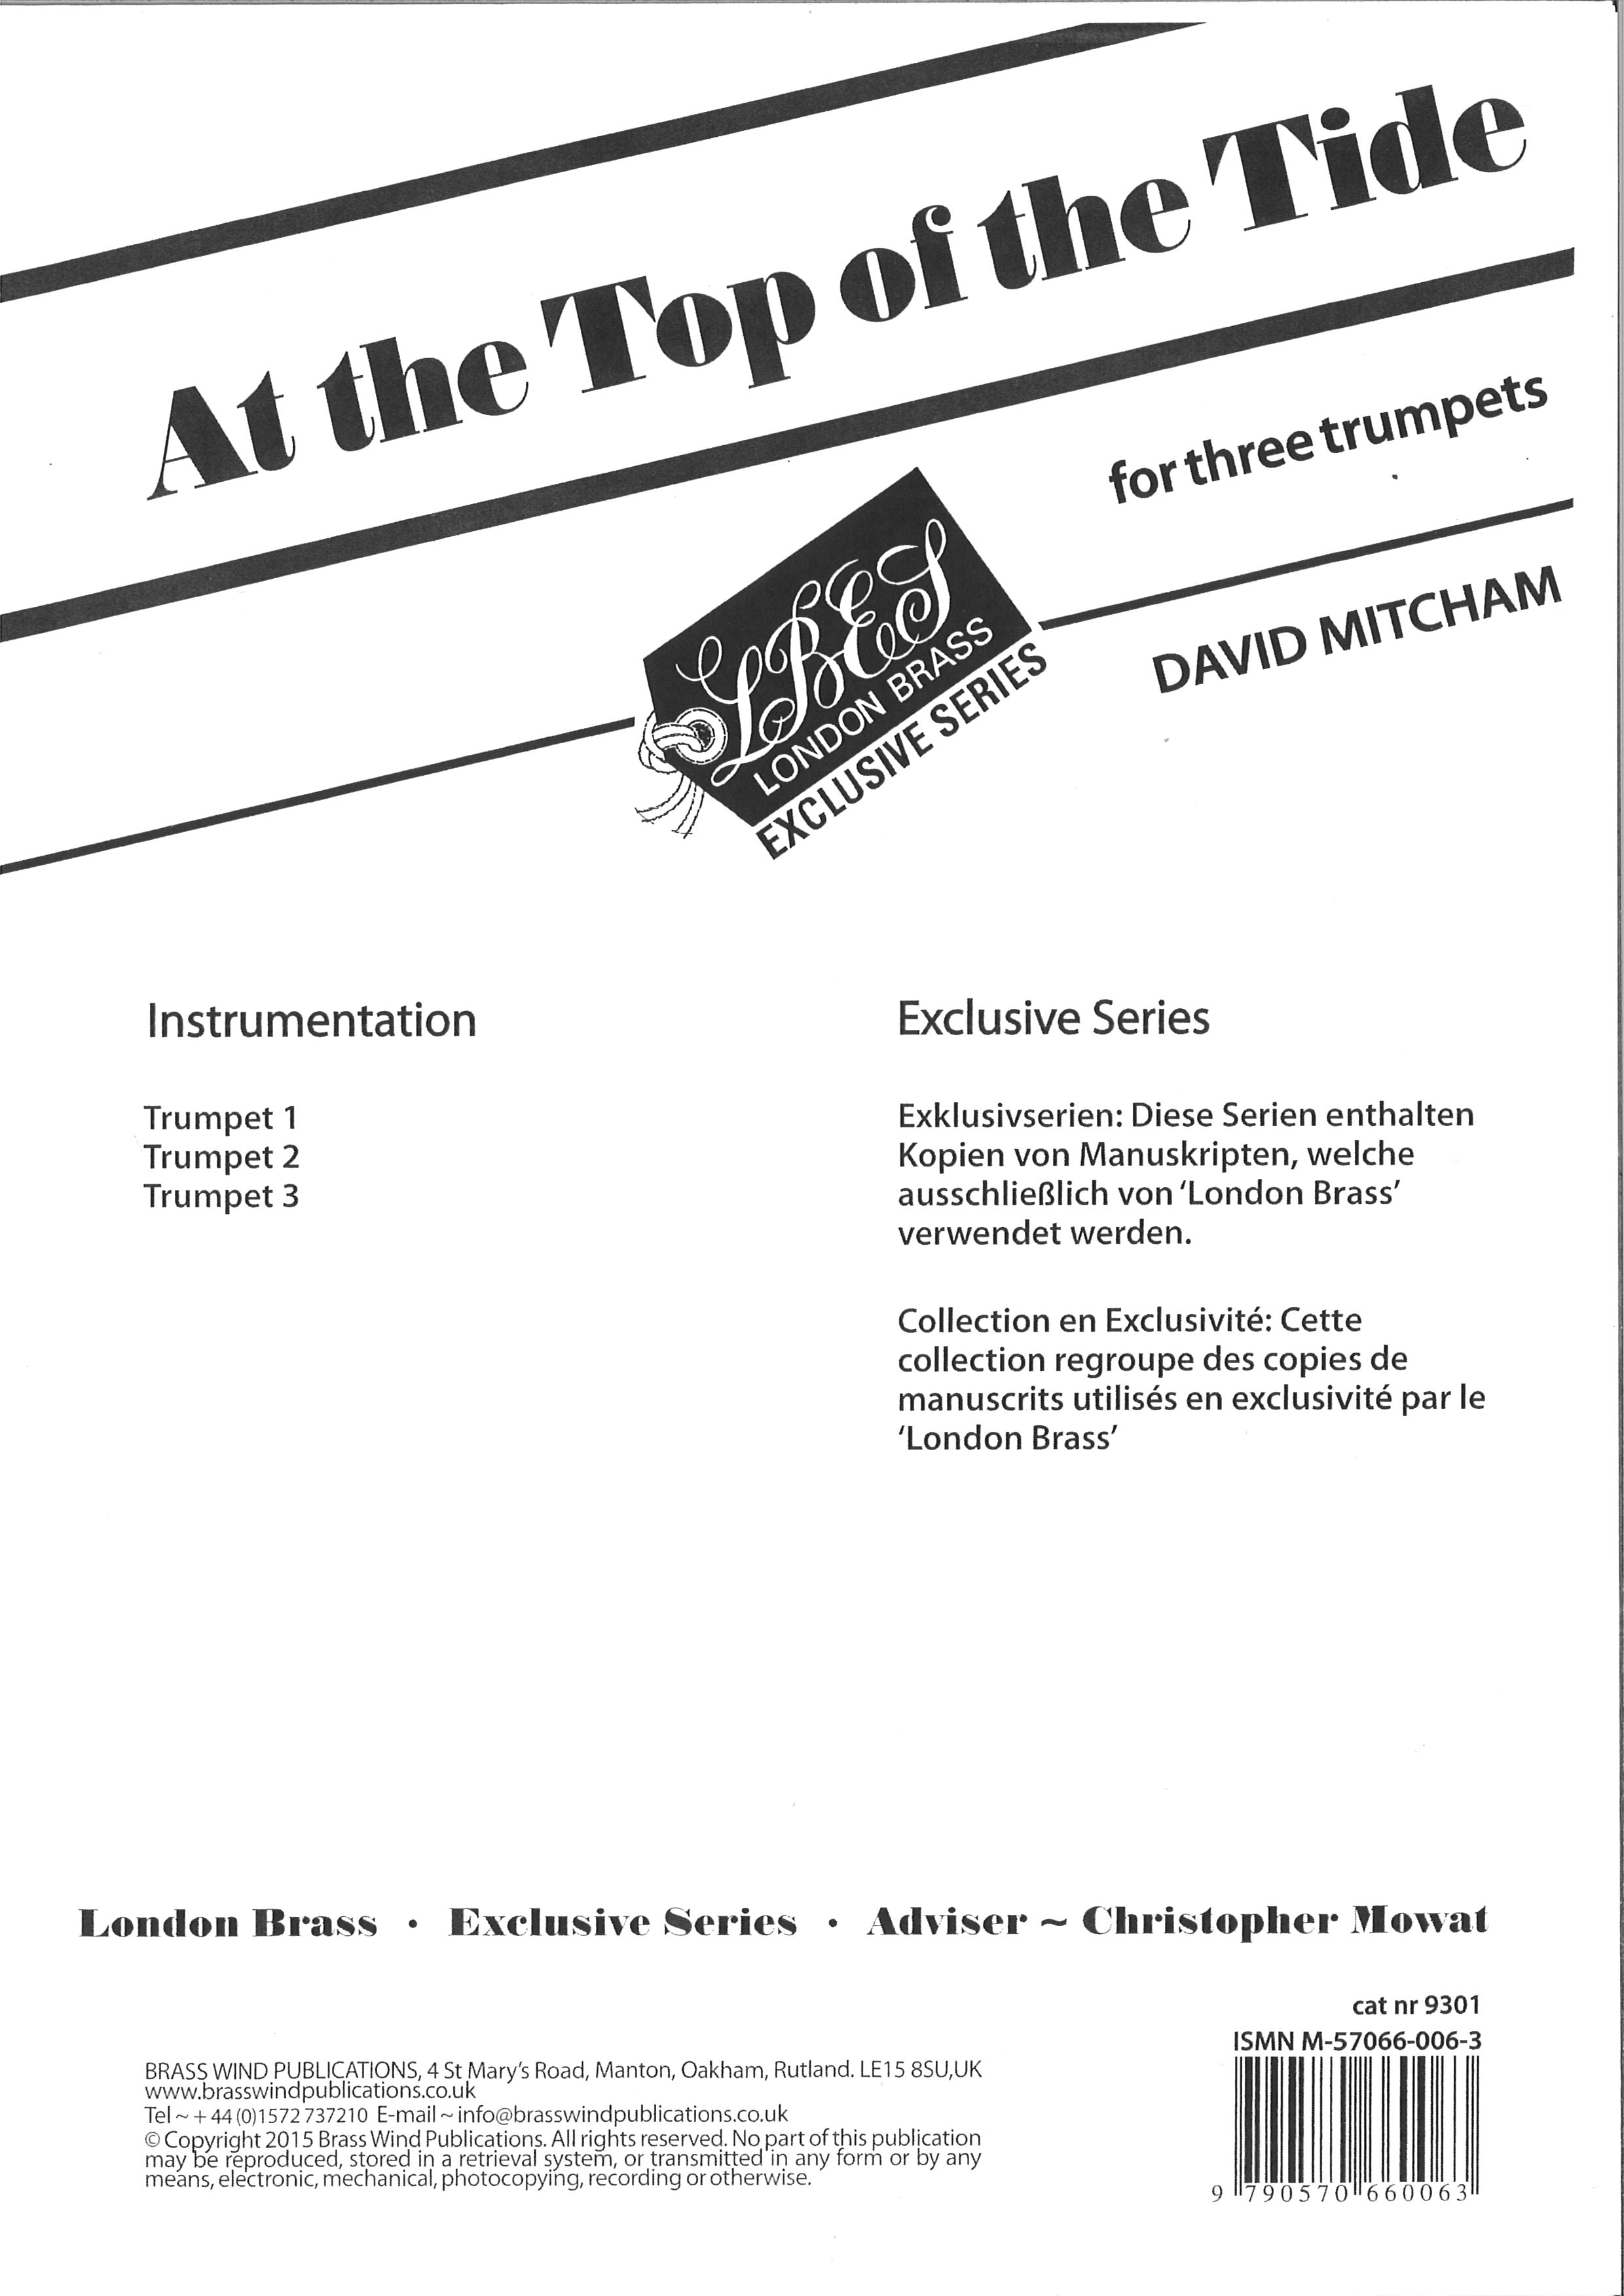 At the Top of the Tide - David Mitcham for Three Trumpets